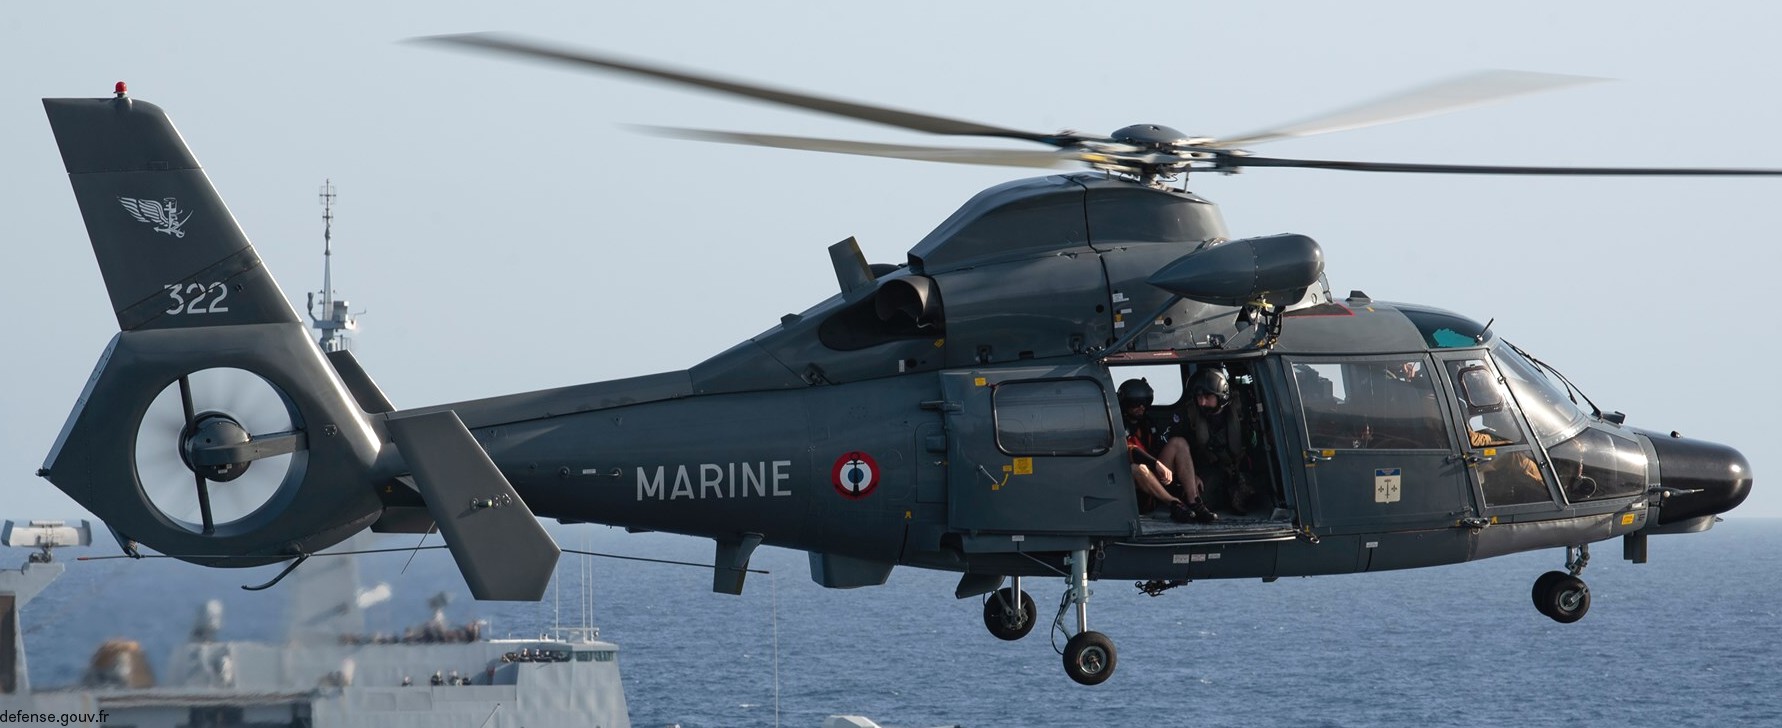 sa365f dauphin helicopter flottille 35f french navy marine nationale 6322 36